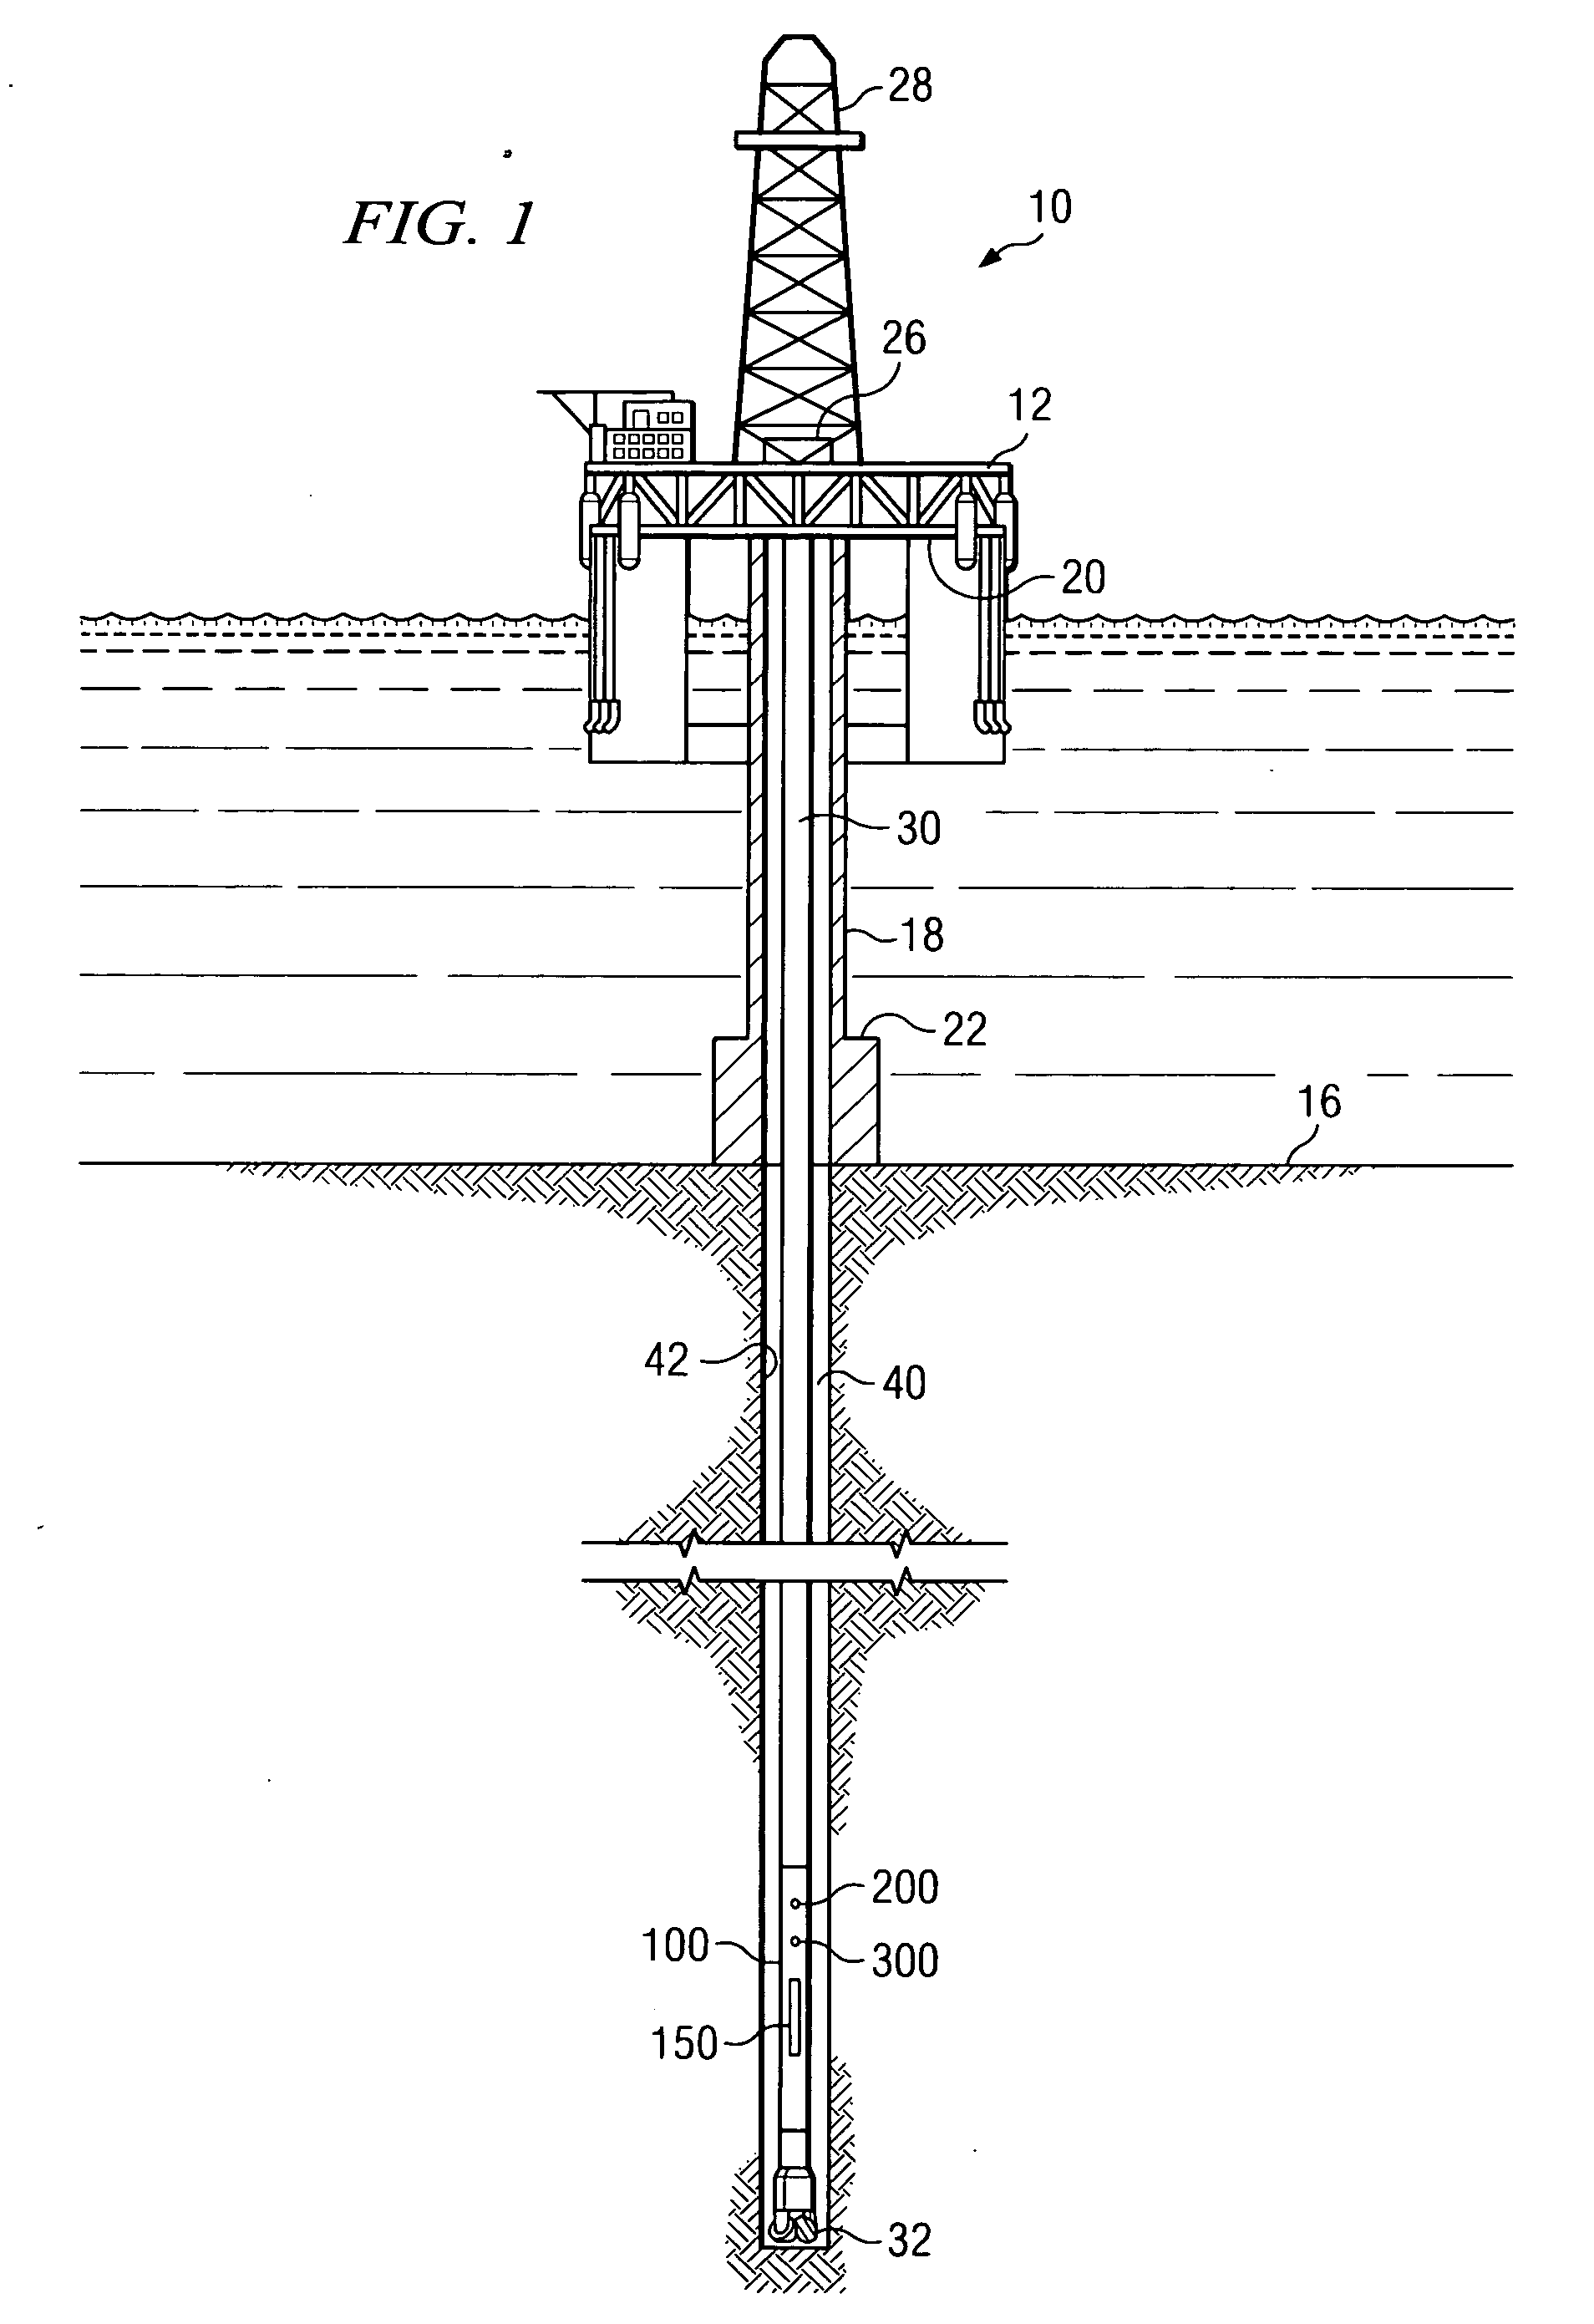 Apparatus and method for downhole dynamics measurements